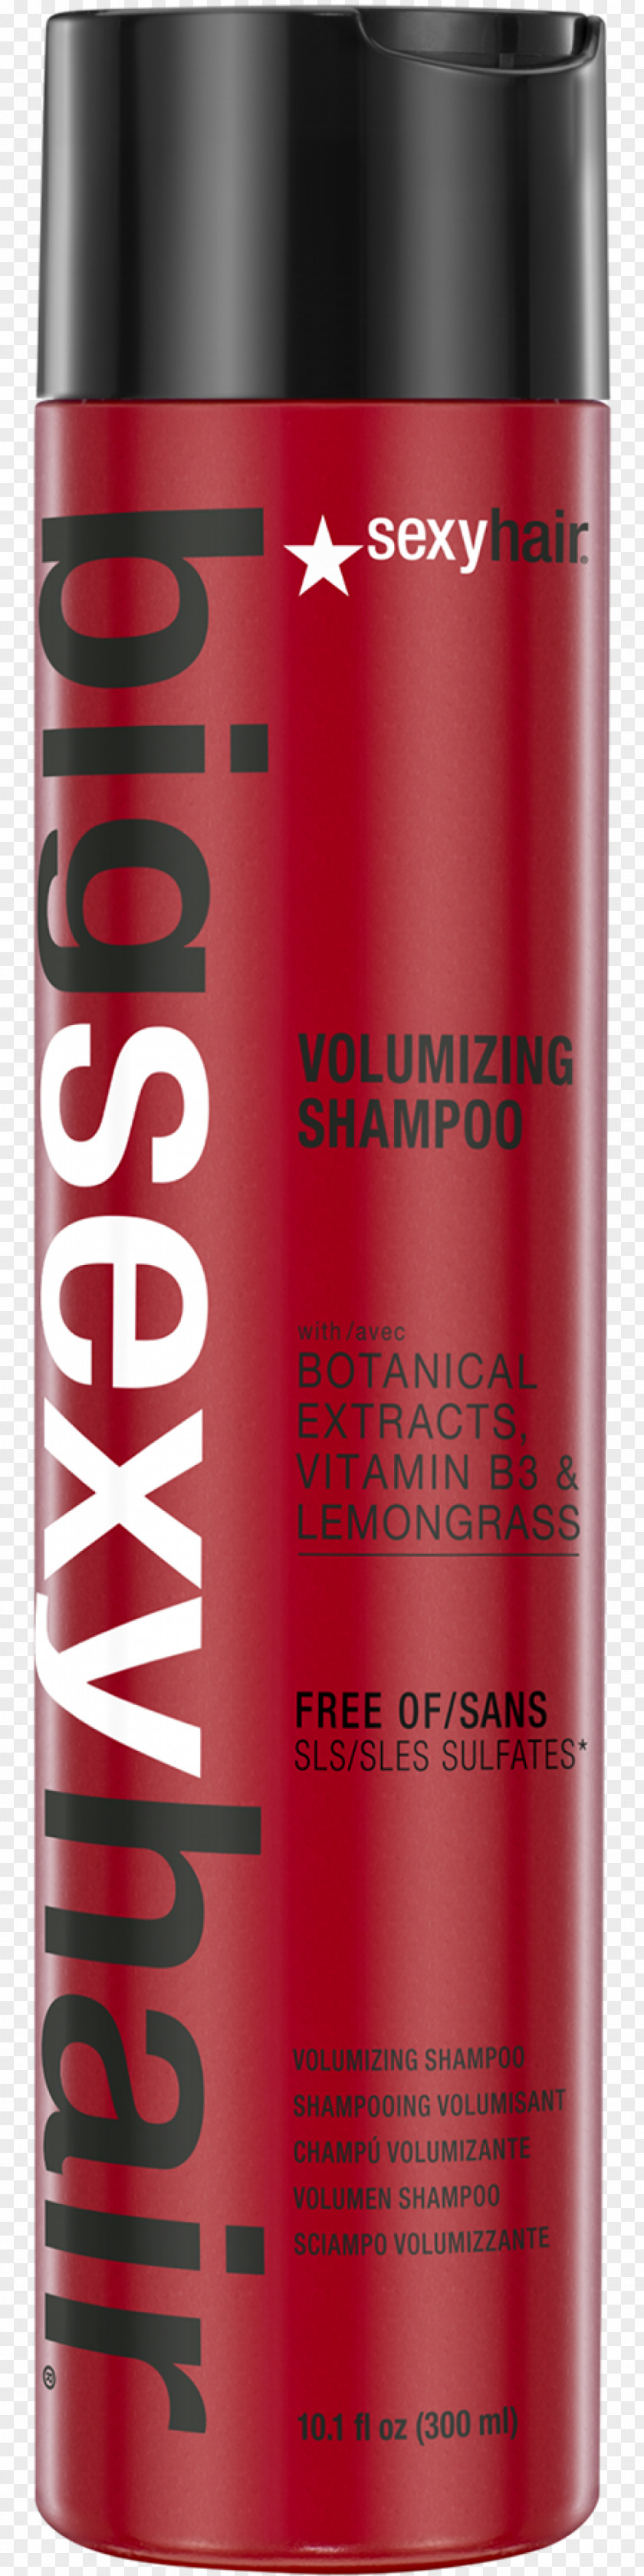 Big Sexy Hair Spray & Play Volumizing Hairspray Conditioner Shampoo Styling Products PNG conditioner Products, shampoo clipart PNG